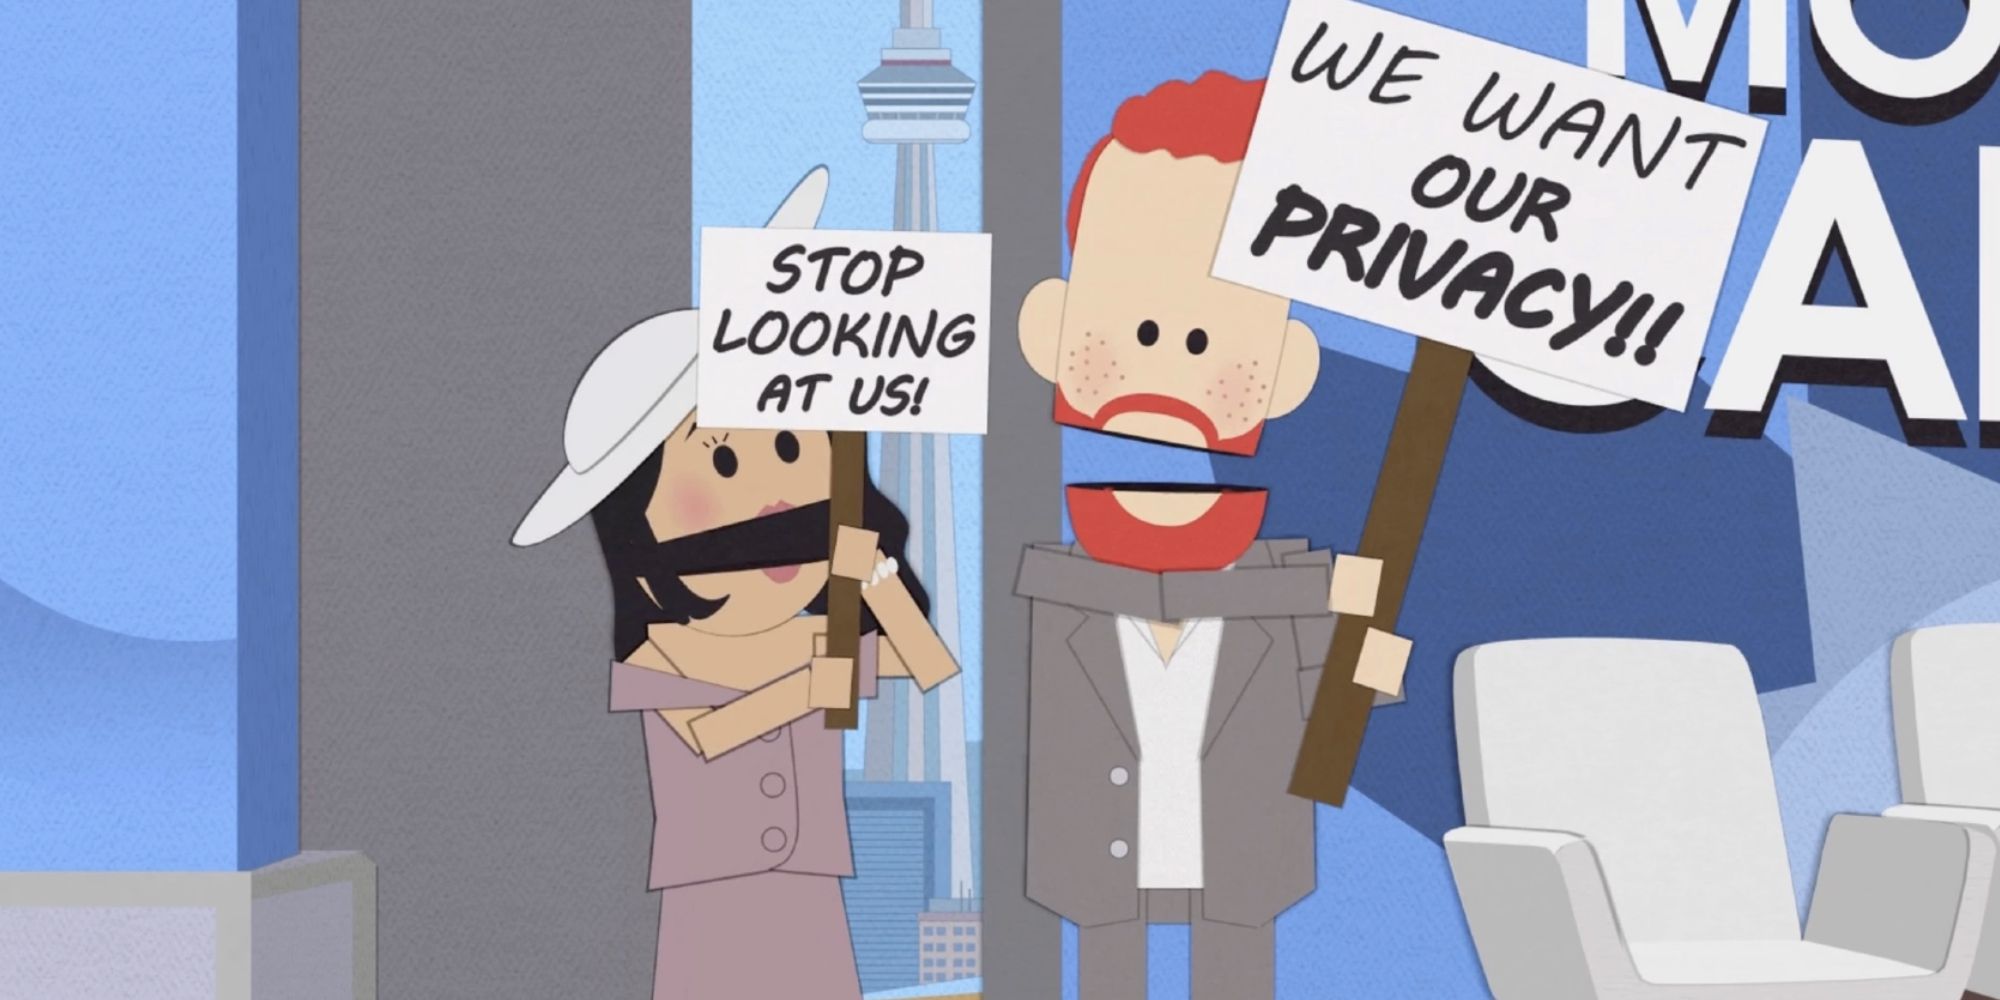 South Park's Harry & Meghan parody characters waving signs